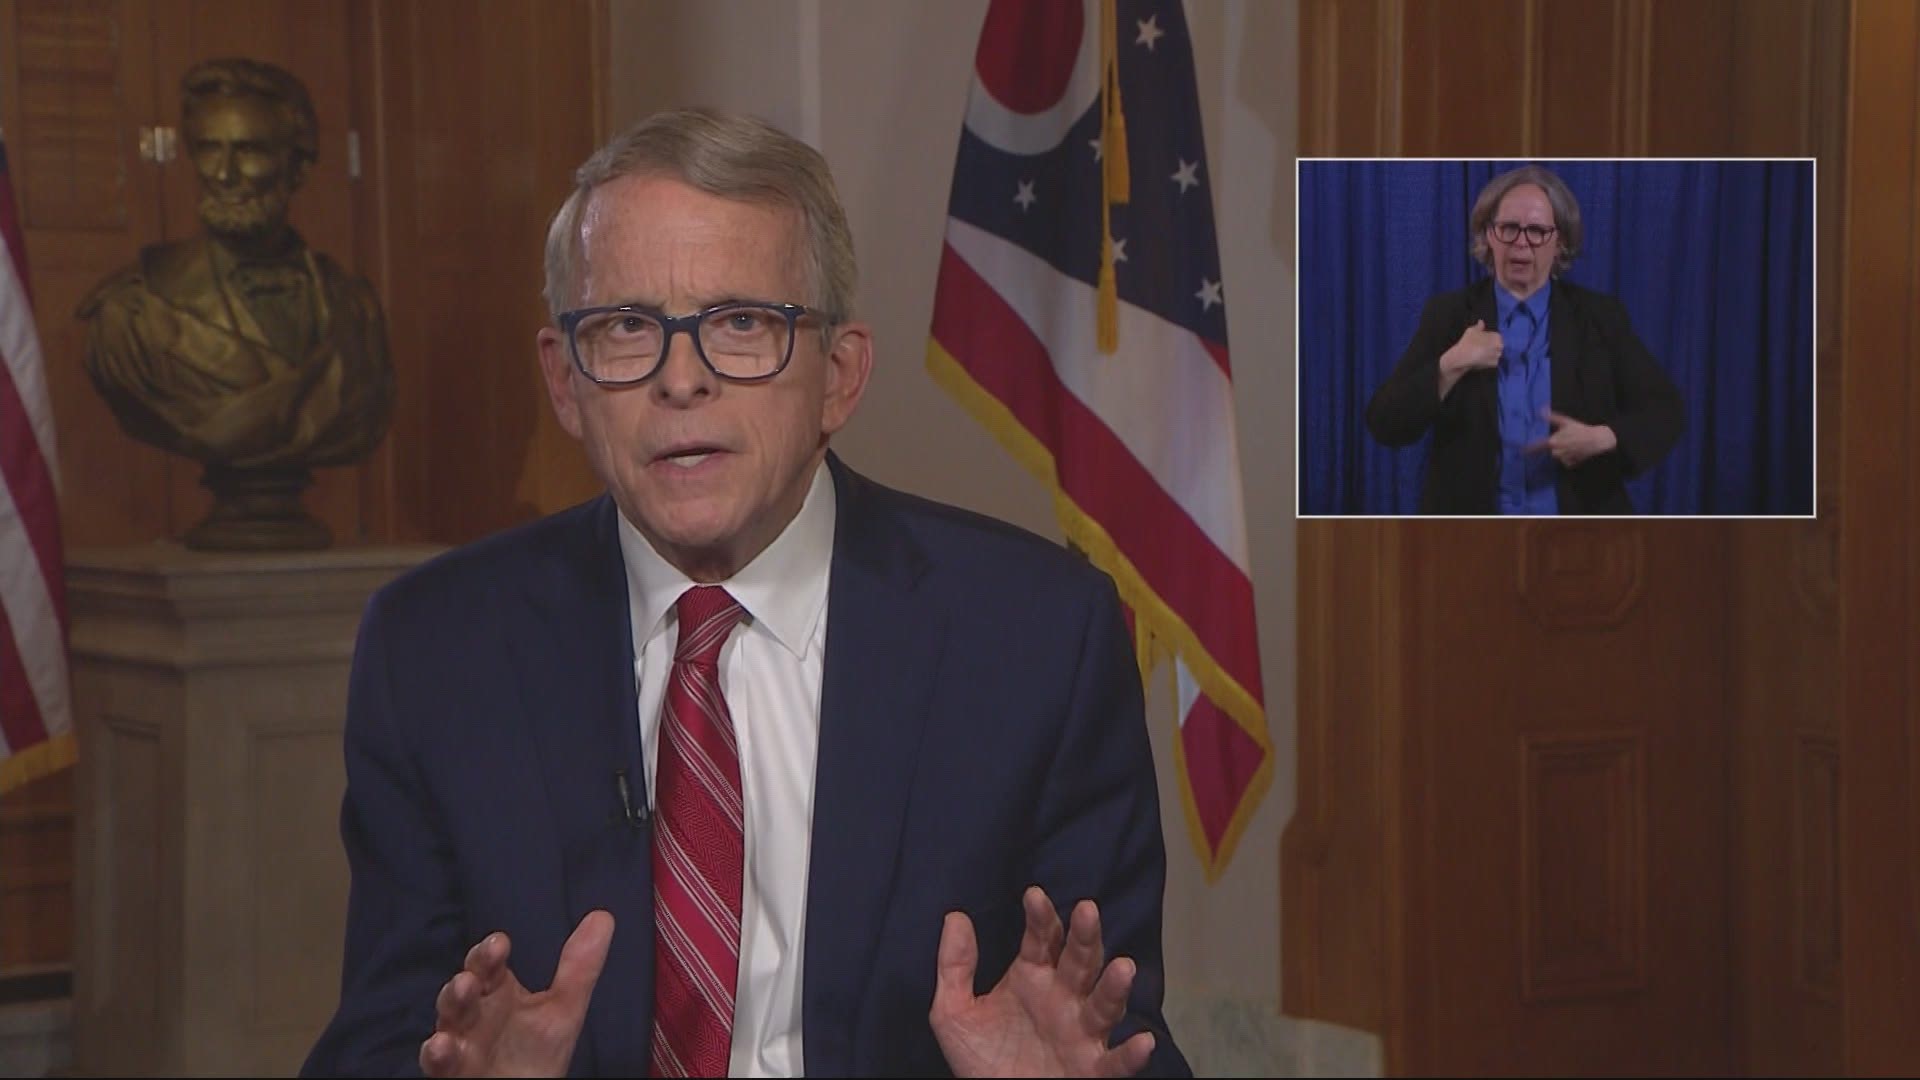 During his statewide address on Wednesday, Gov. Mike DeWine announced all COVID-19 health orders in Ohio will be lifted on June 2.